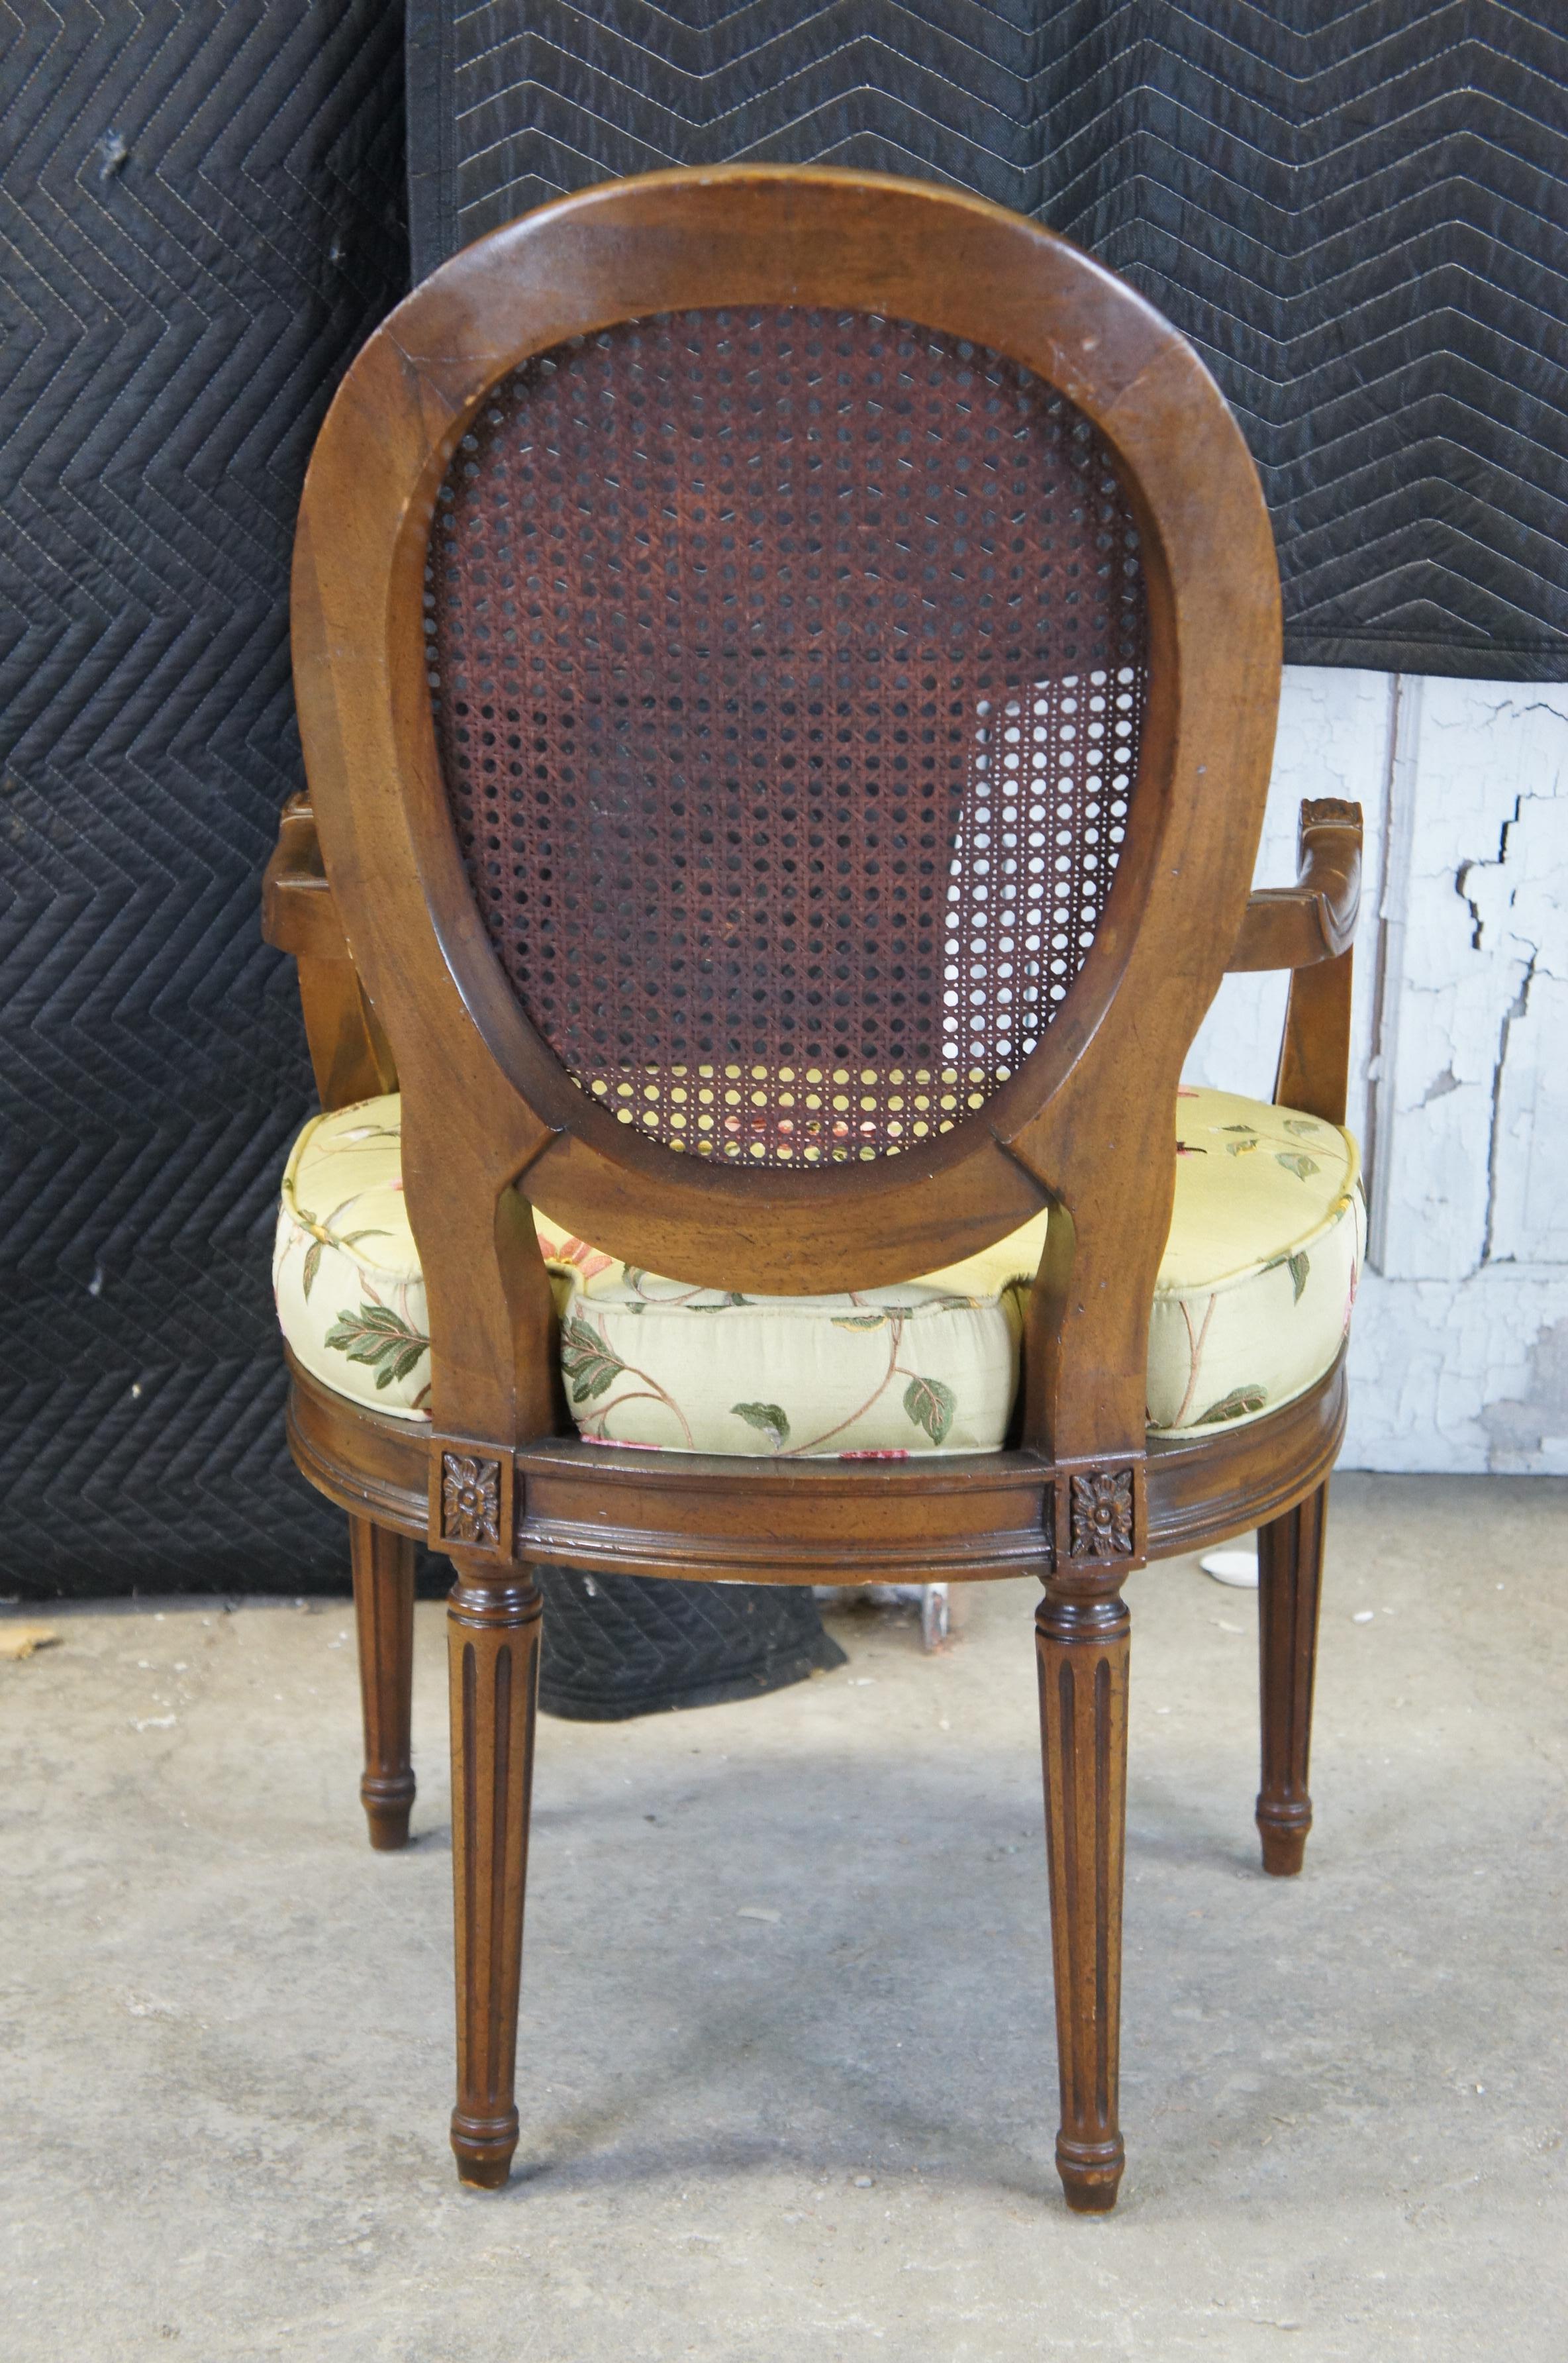 Upholstery 2 Vintage French Louis XVI Caned Walnut Open Arm Oval Balloon Back Arm Chairs